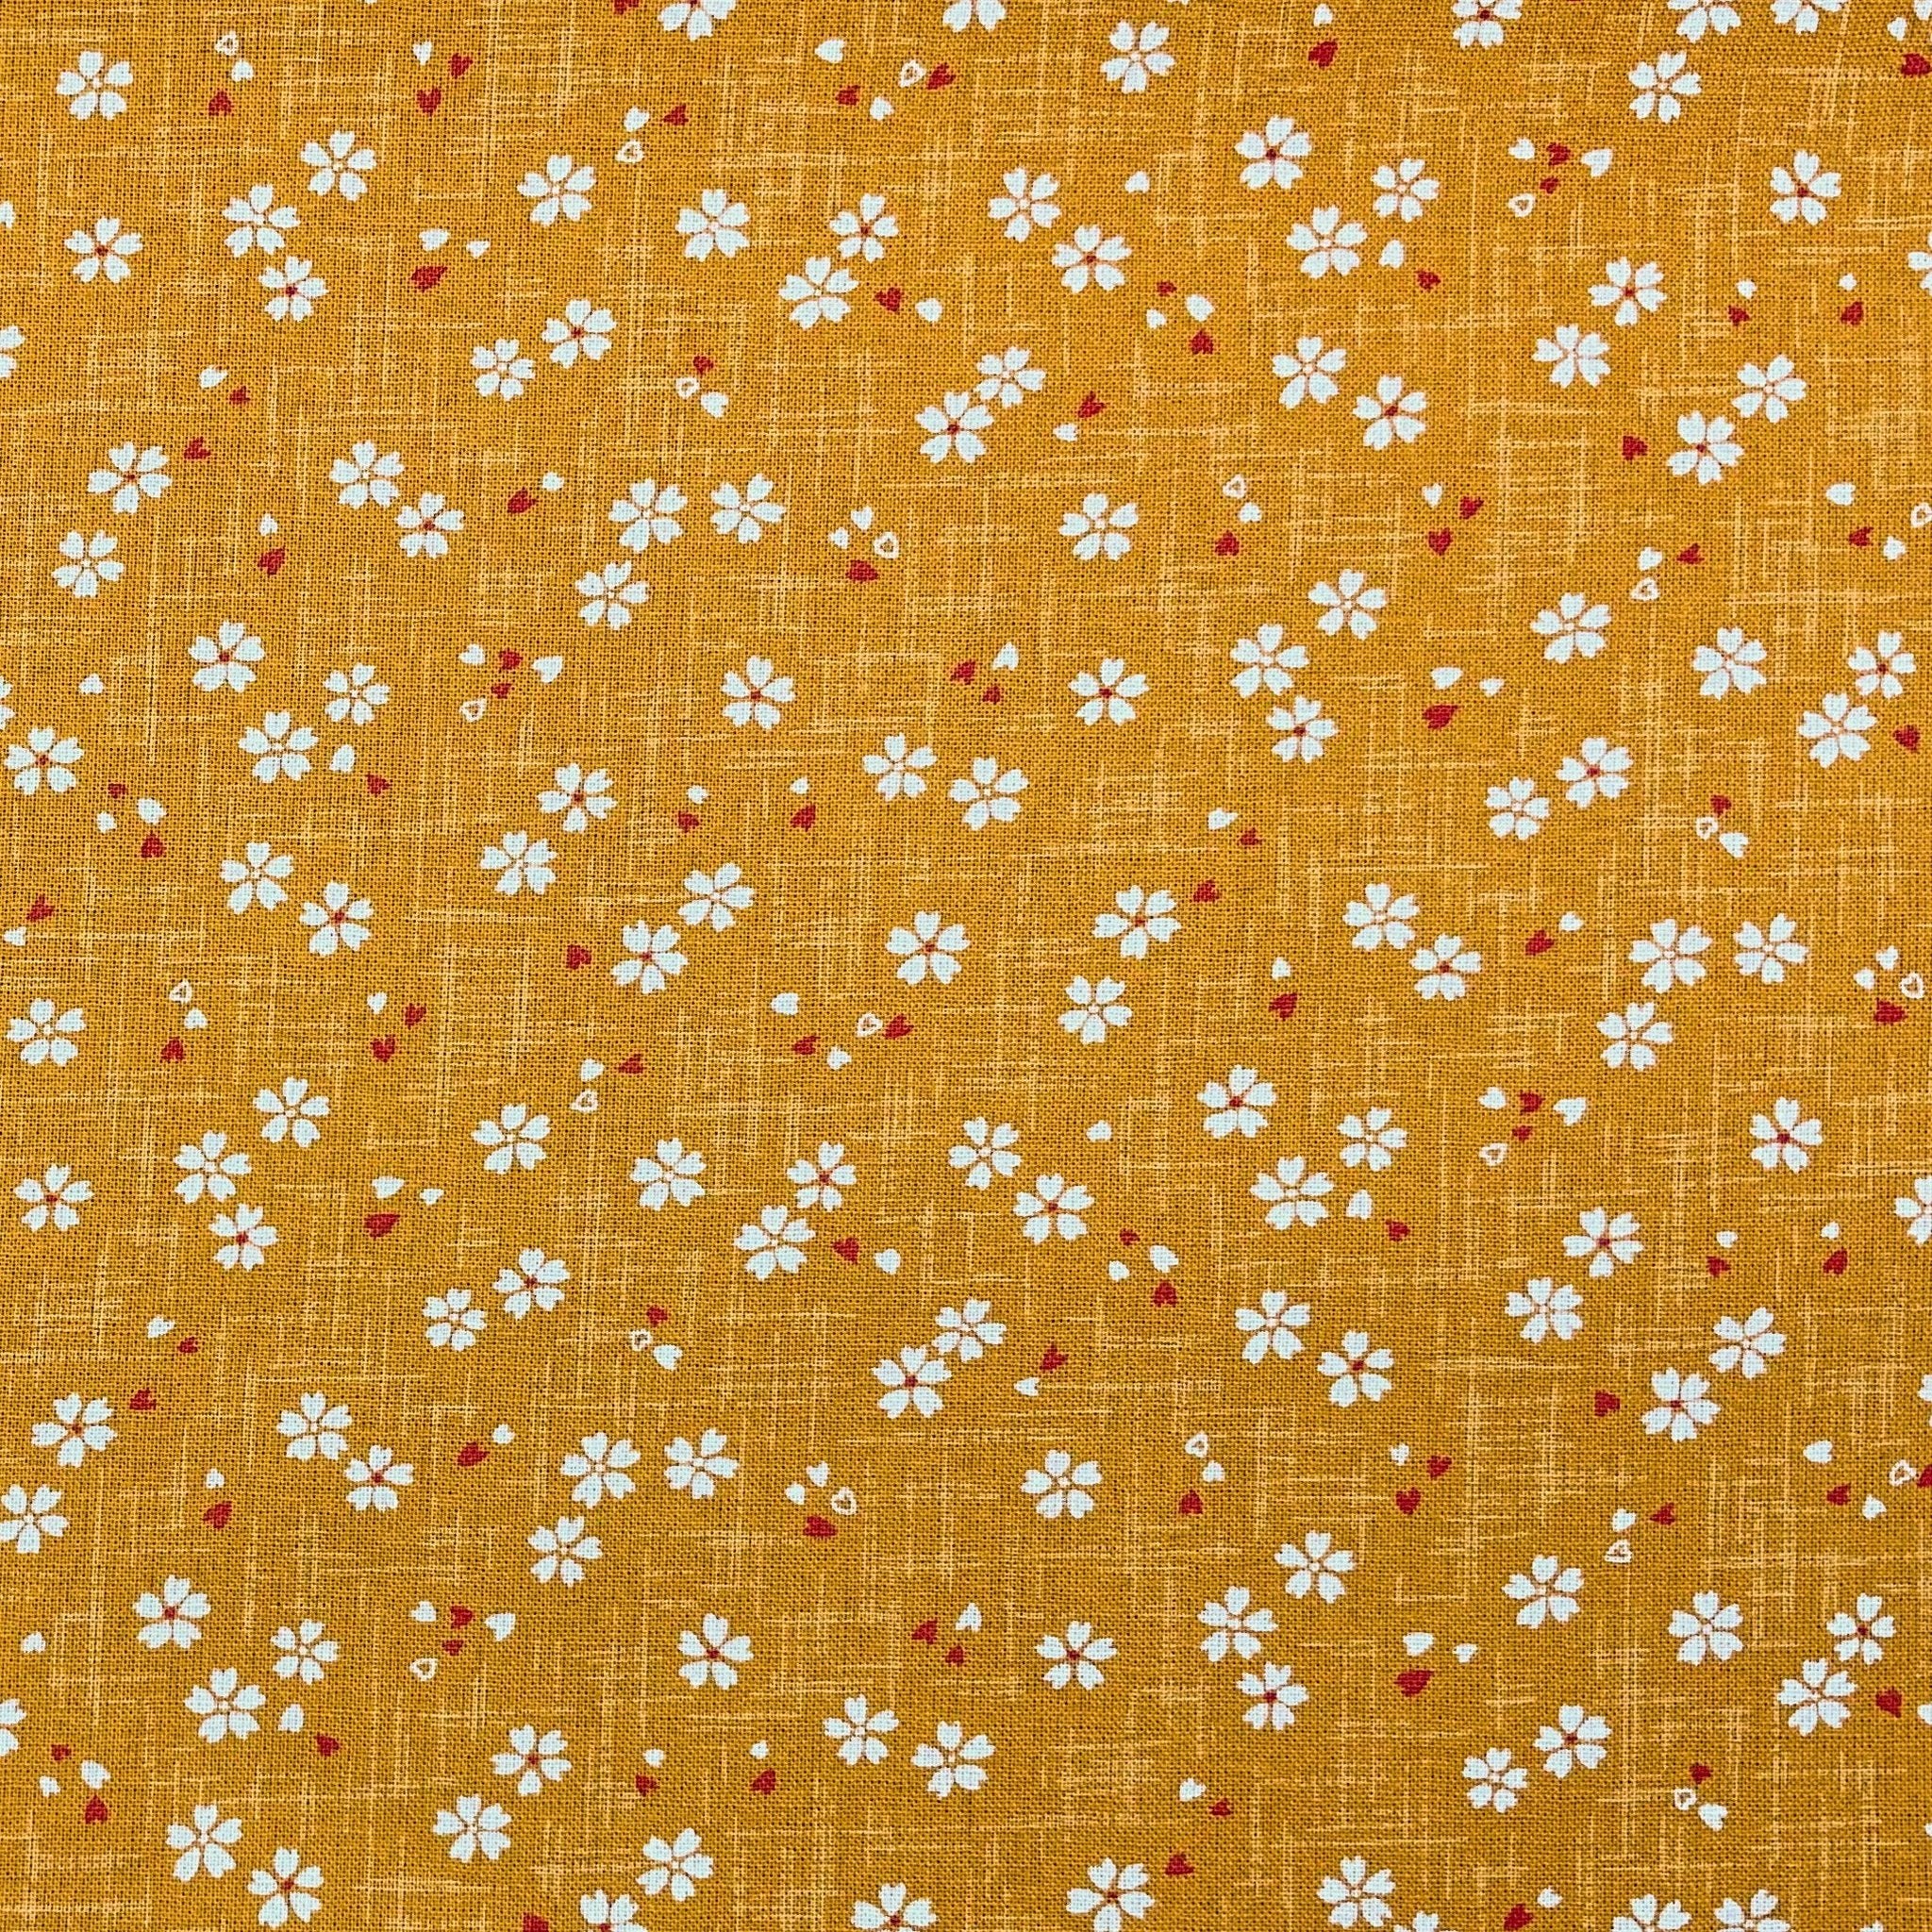 Japanese Cotton Sheeting Print - Cherry Blossom with Falling Petals Mustard